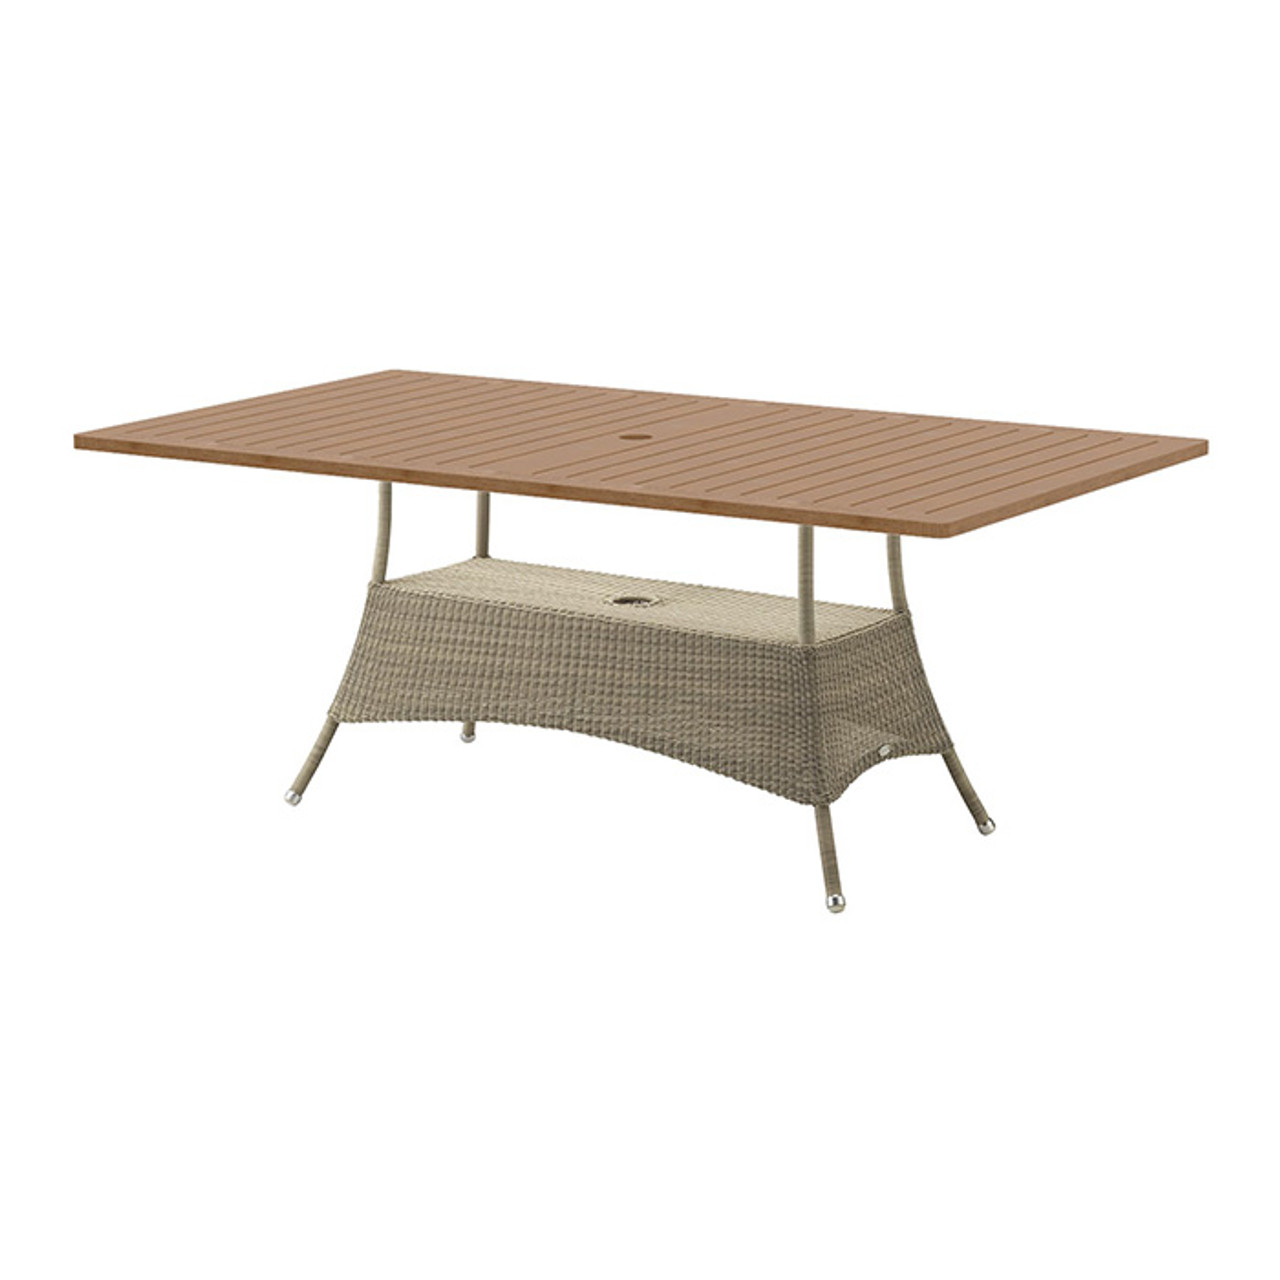 Cane-line Aspect Dining Table | Juniper House